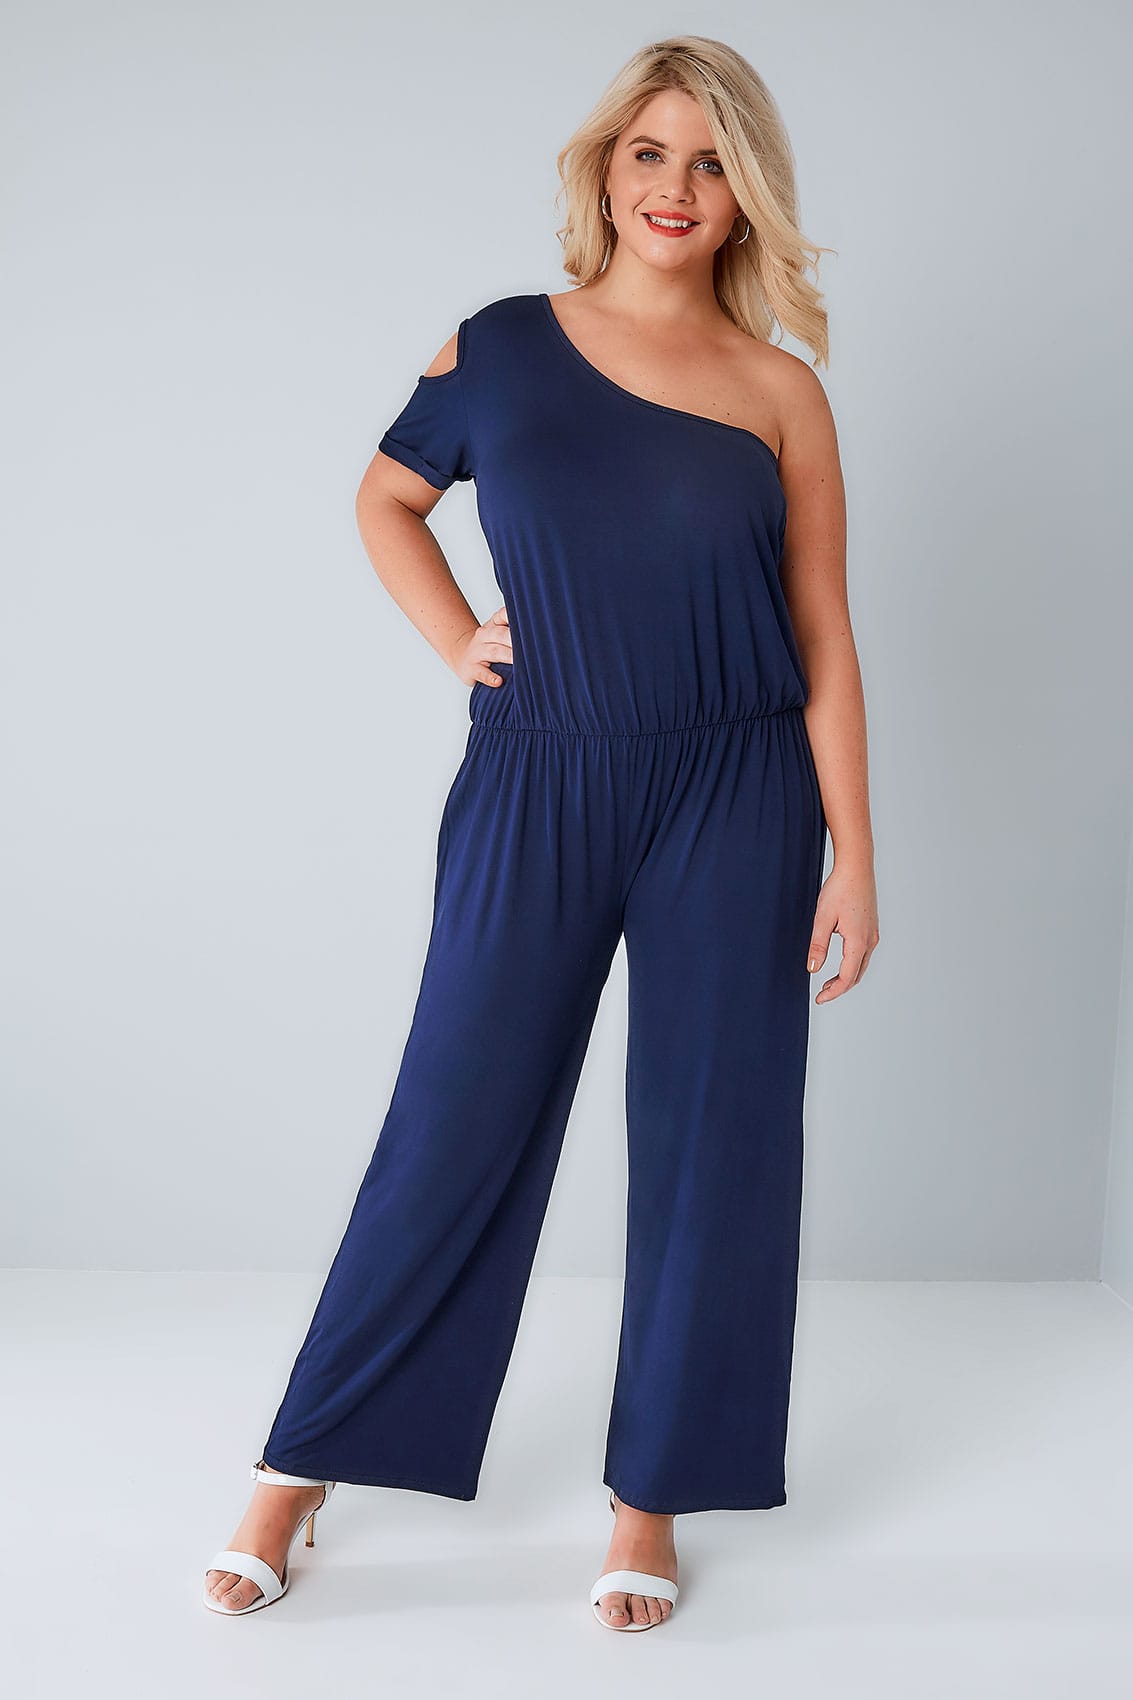 LIMITED COLLECTION Navy One Shoulder Jumpsuit, Plus size 16 to 32